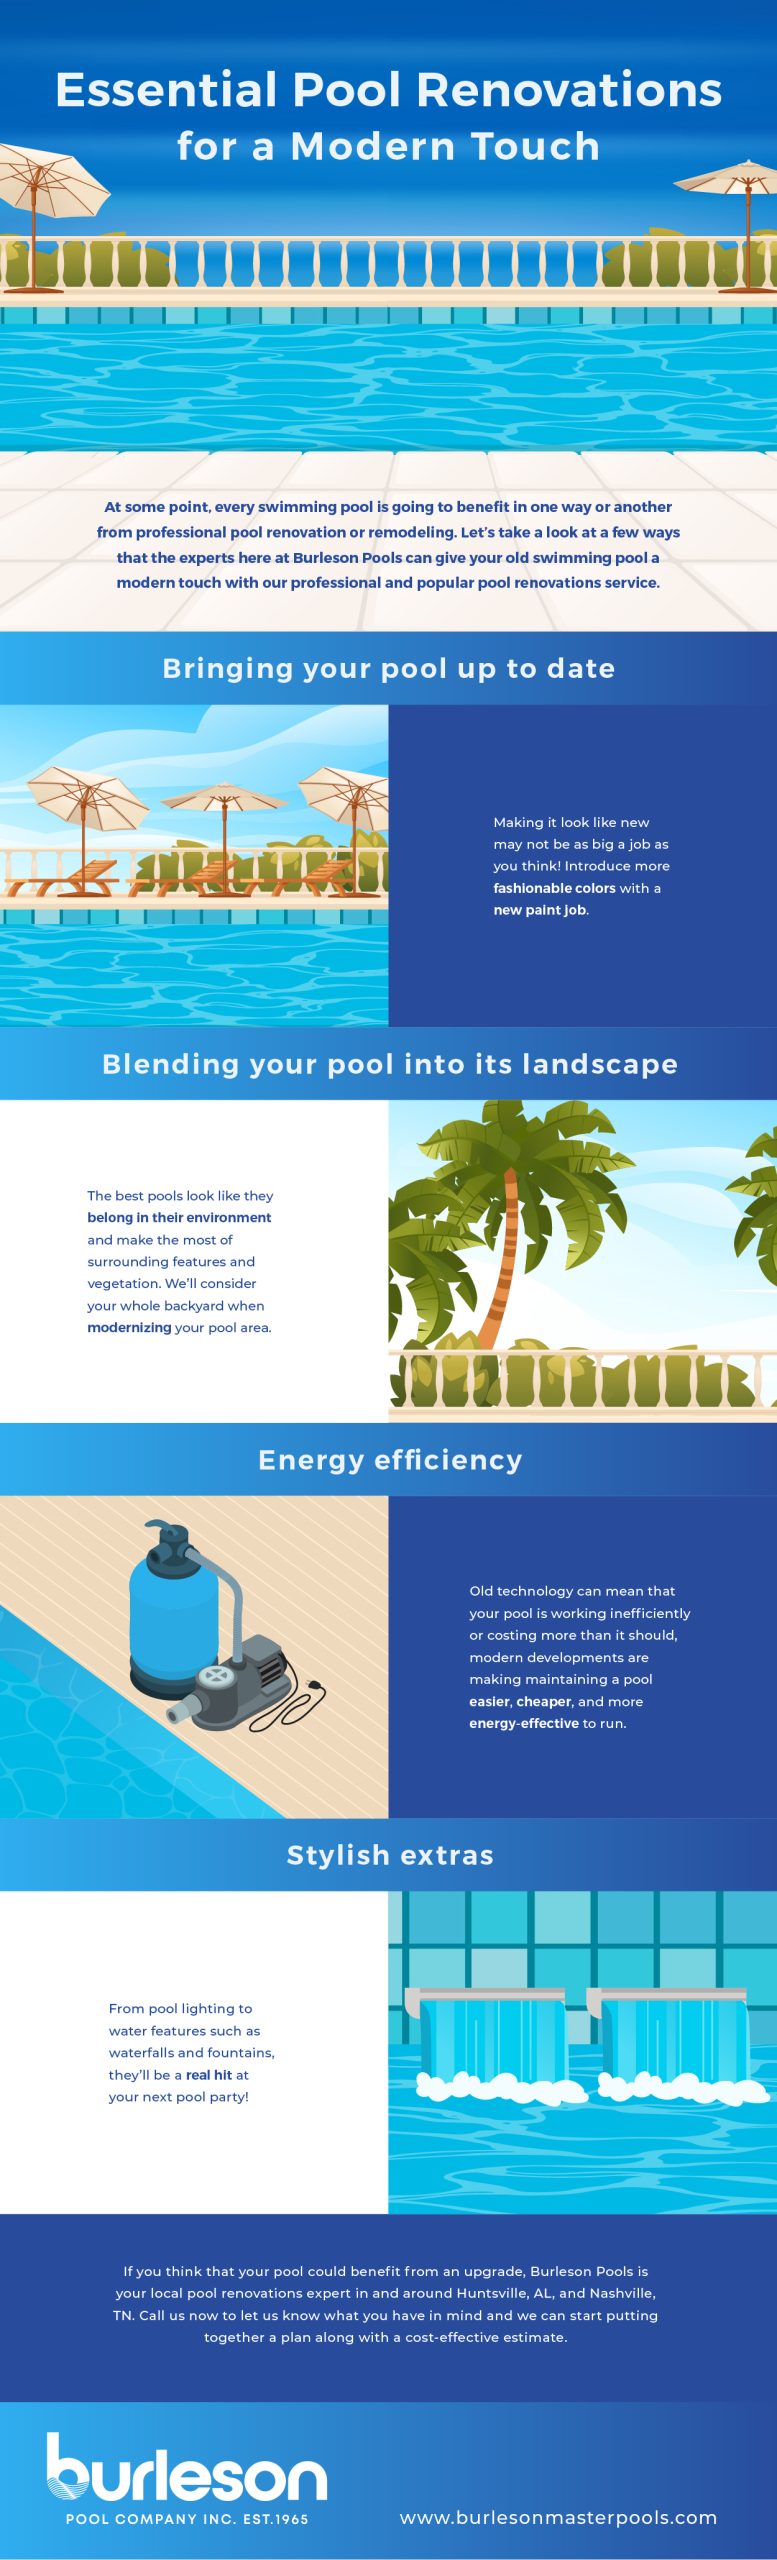 Essential Pool Renovations for a Modern Touch Infographic